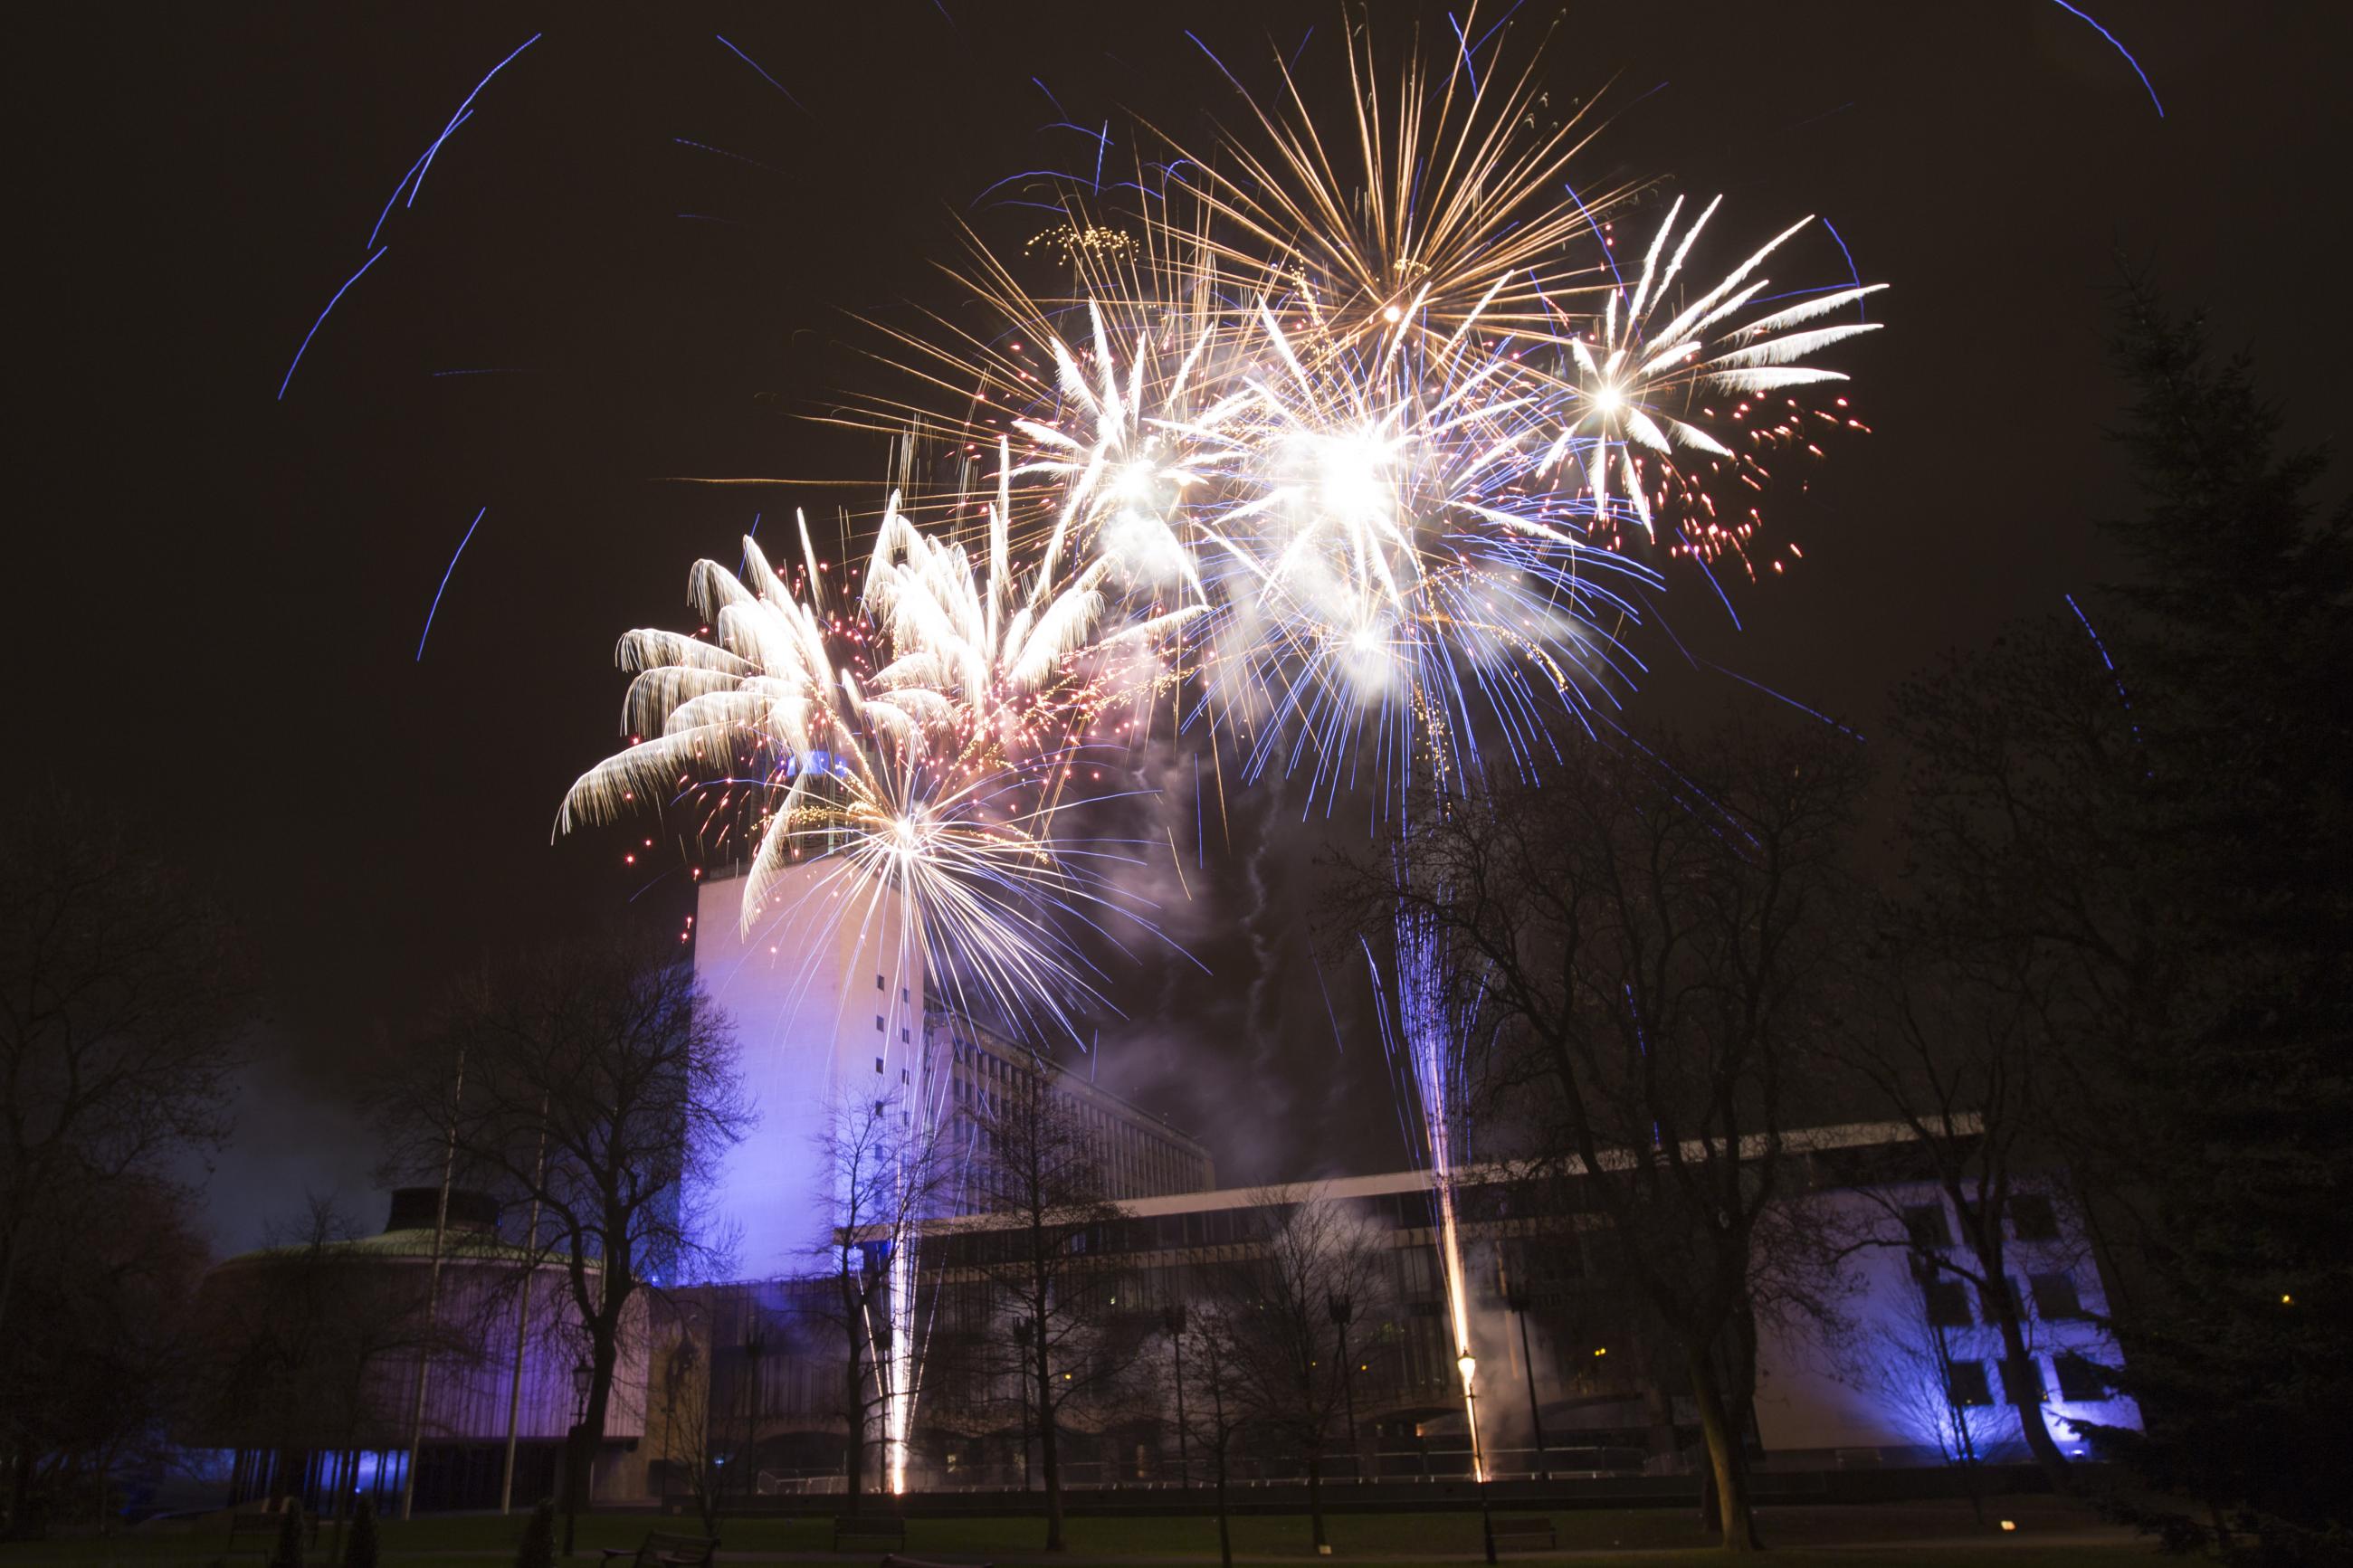 Newcastle’s New Year’s Eve family fireworks at the Civic Centre